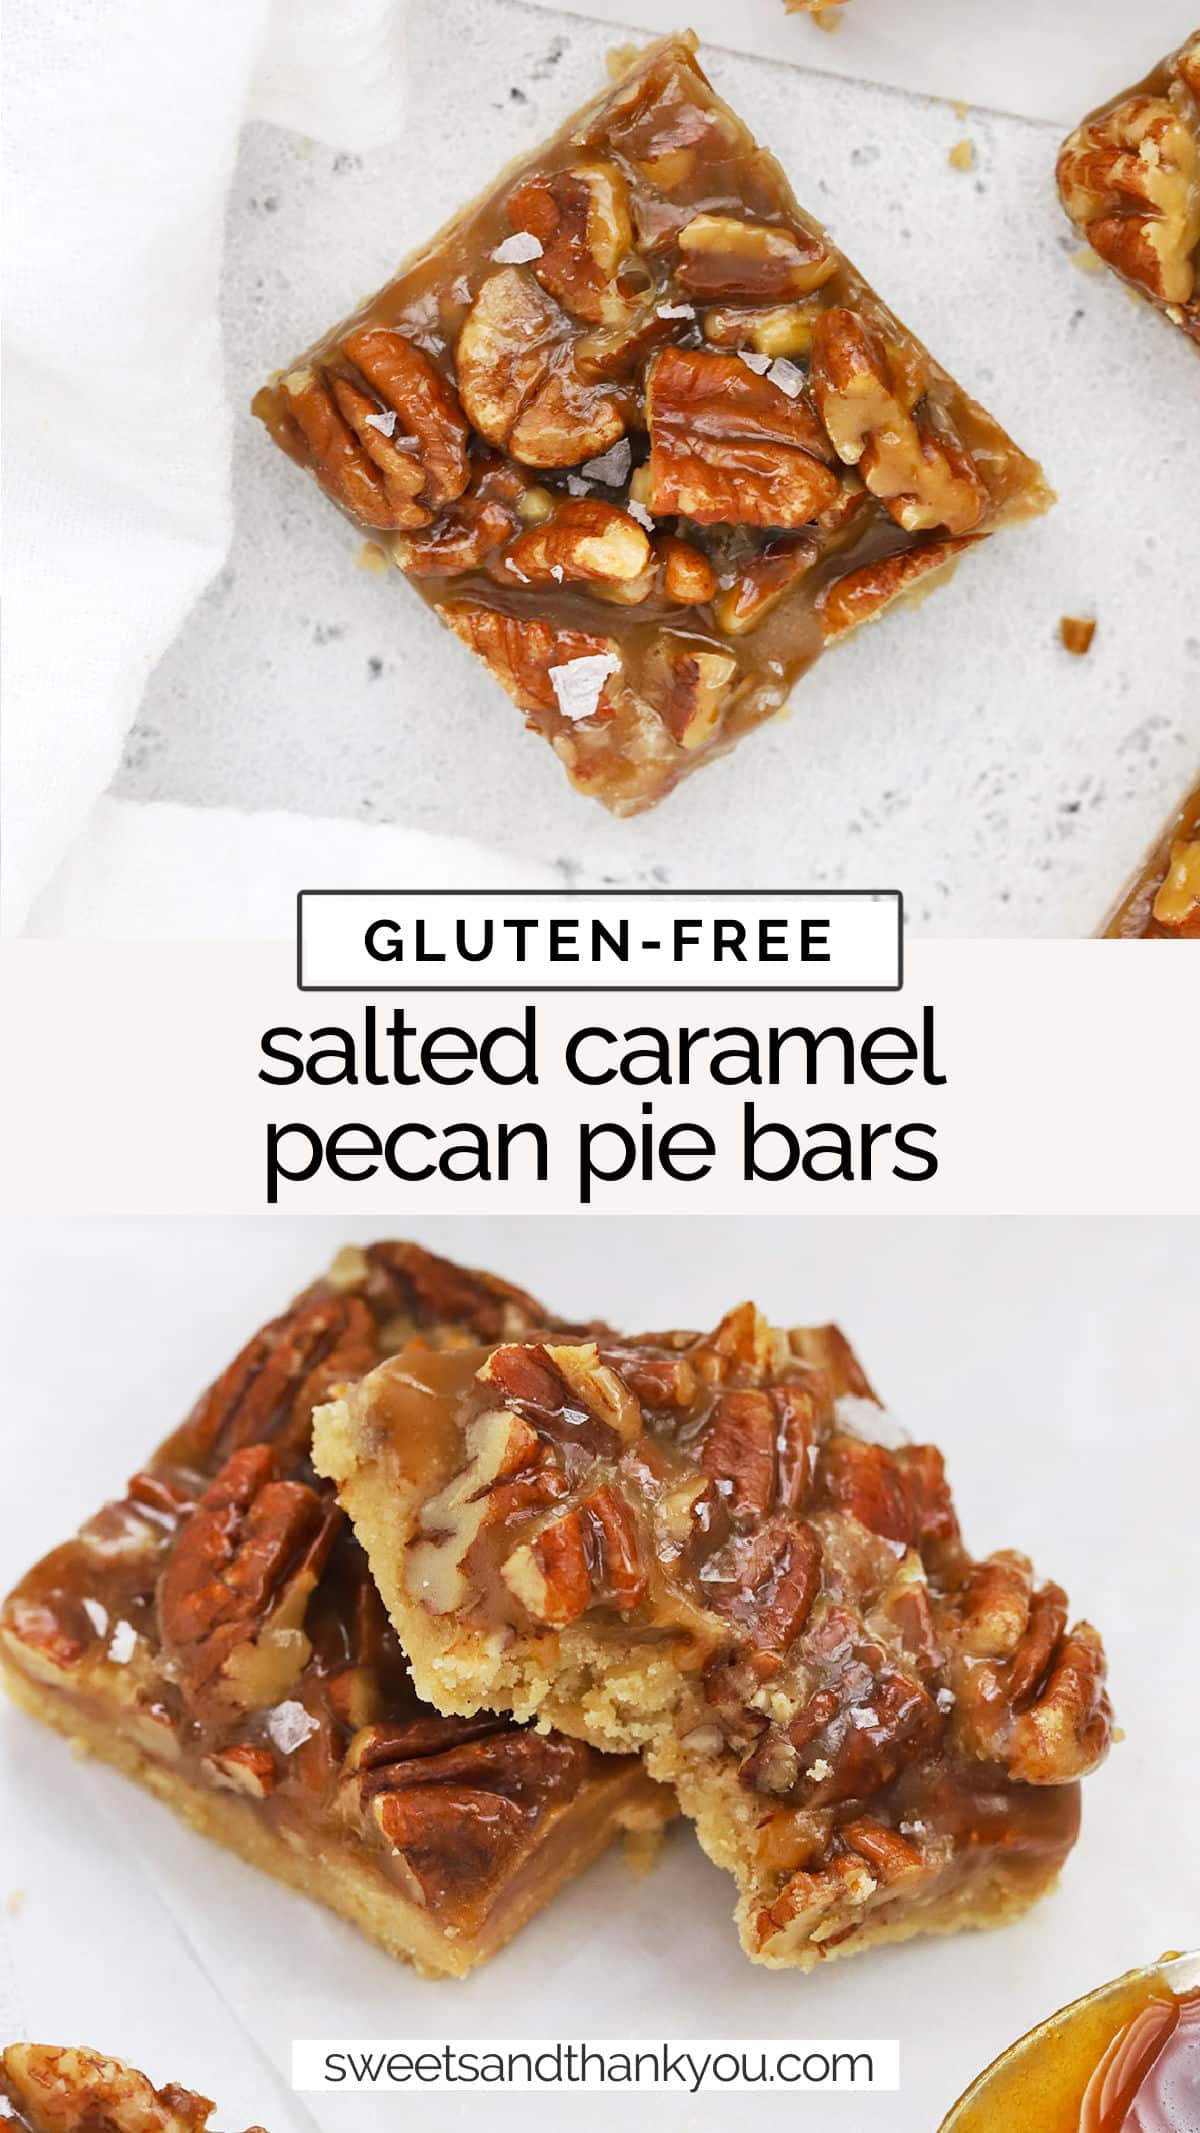 Gluten-Free Salted Caramel Pecan Bars - With their brown sugar shortbread crust and salted caramel pecan filling, these yummy gluten-free pecan pie bars are as delicious as they are gorgeous. // Gluten Free Pecan Bars // Pecan bars without corn syrup // pecan bars no corn syrup // pecan pie bars recipe // thanksgiving dessert // gluten free dessert // gluten free baking // gluten free pecan pie